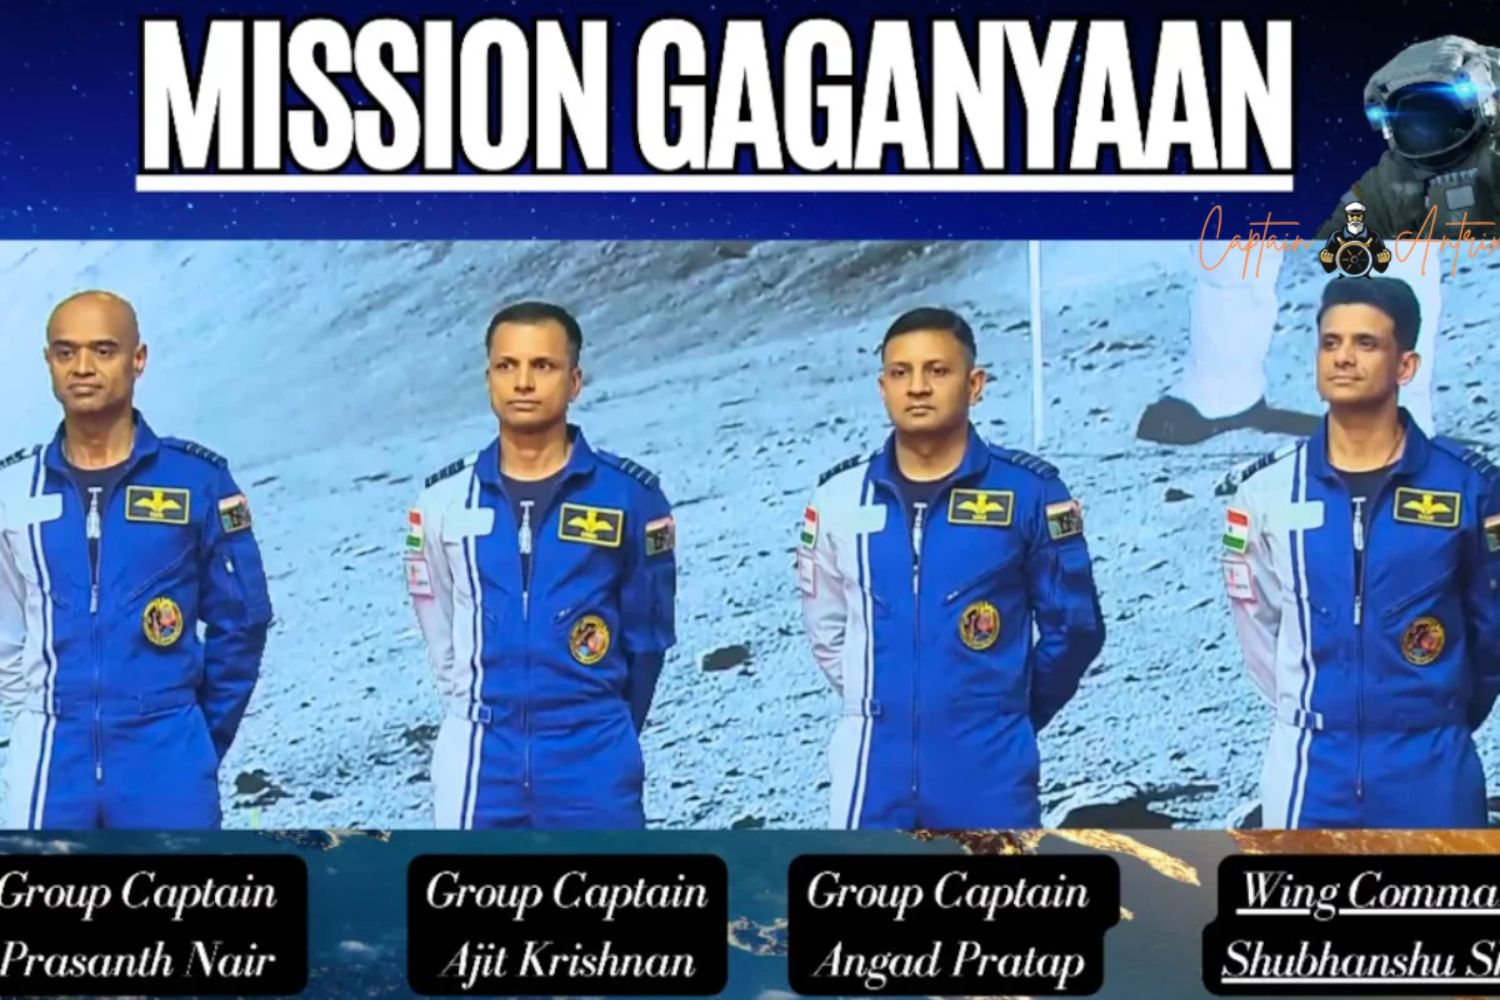 PM Modi Reveals India's First Space Crew! You Won't Believe Who's Flying to the Stars!